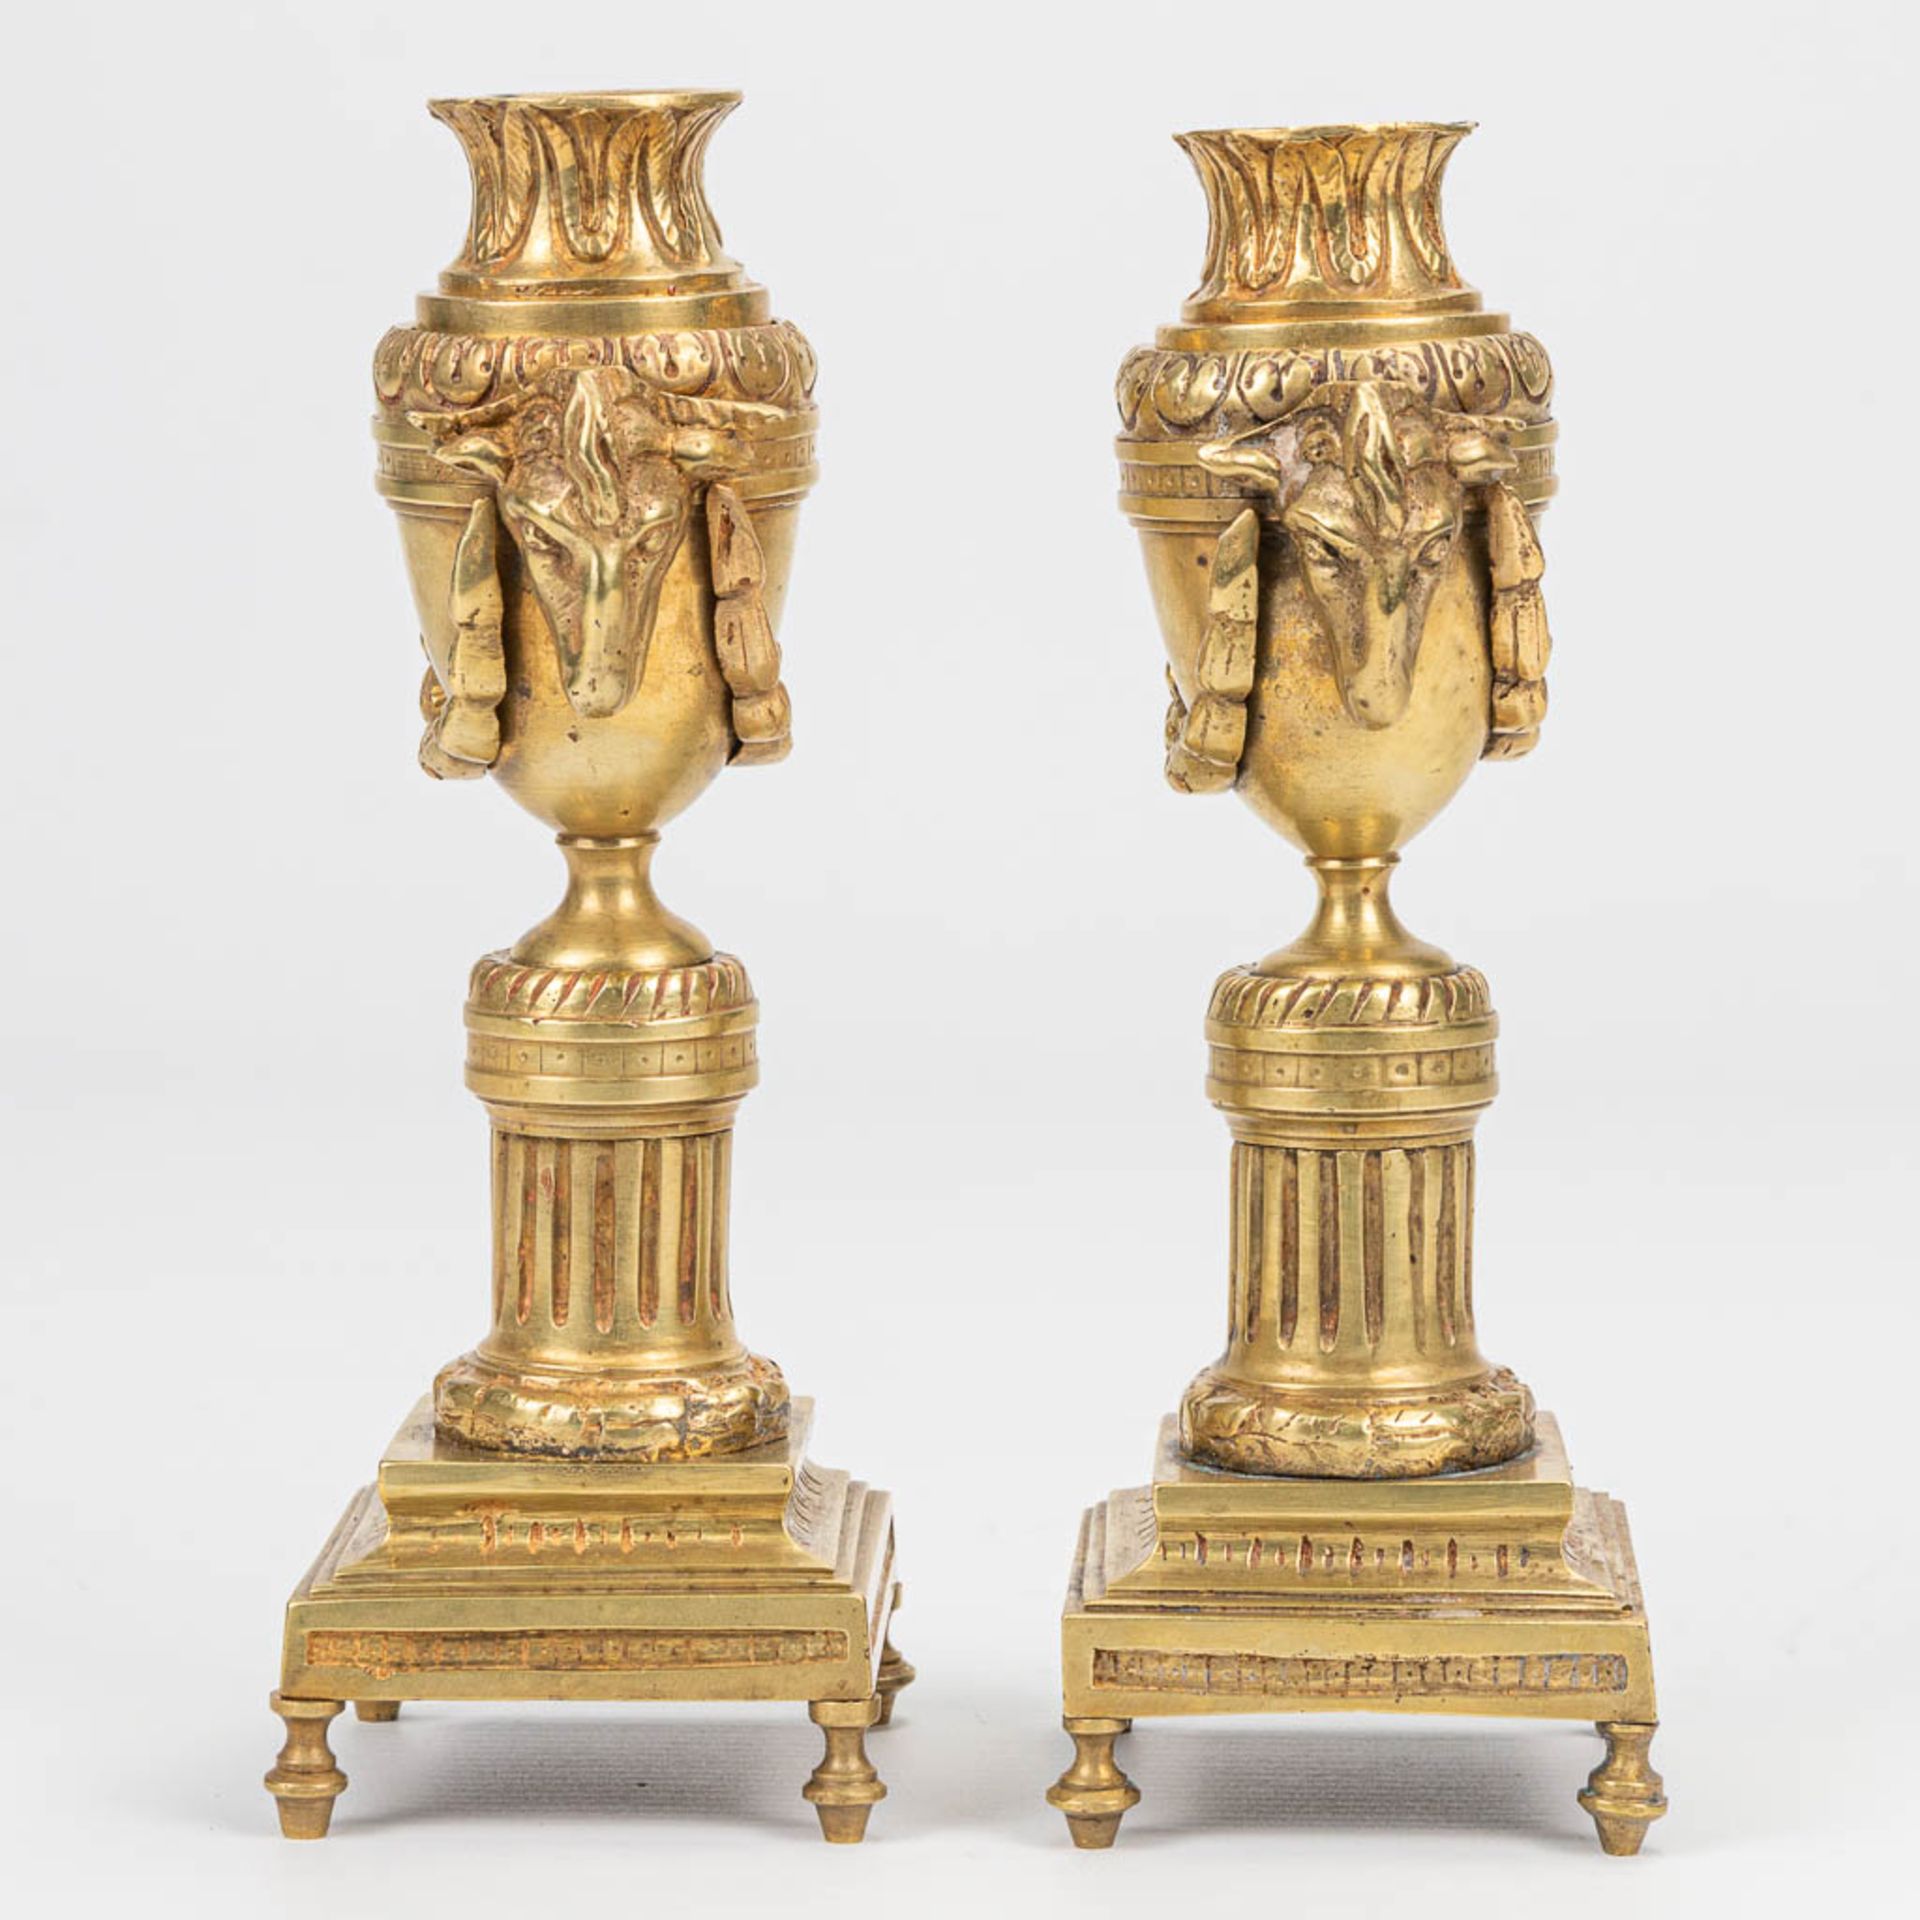 A pair of candlesticks with reversible candle holders and ram's heads in Louis XVI style. (7 x 8 x 1 - Image 4 of 8